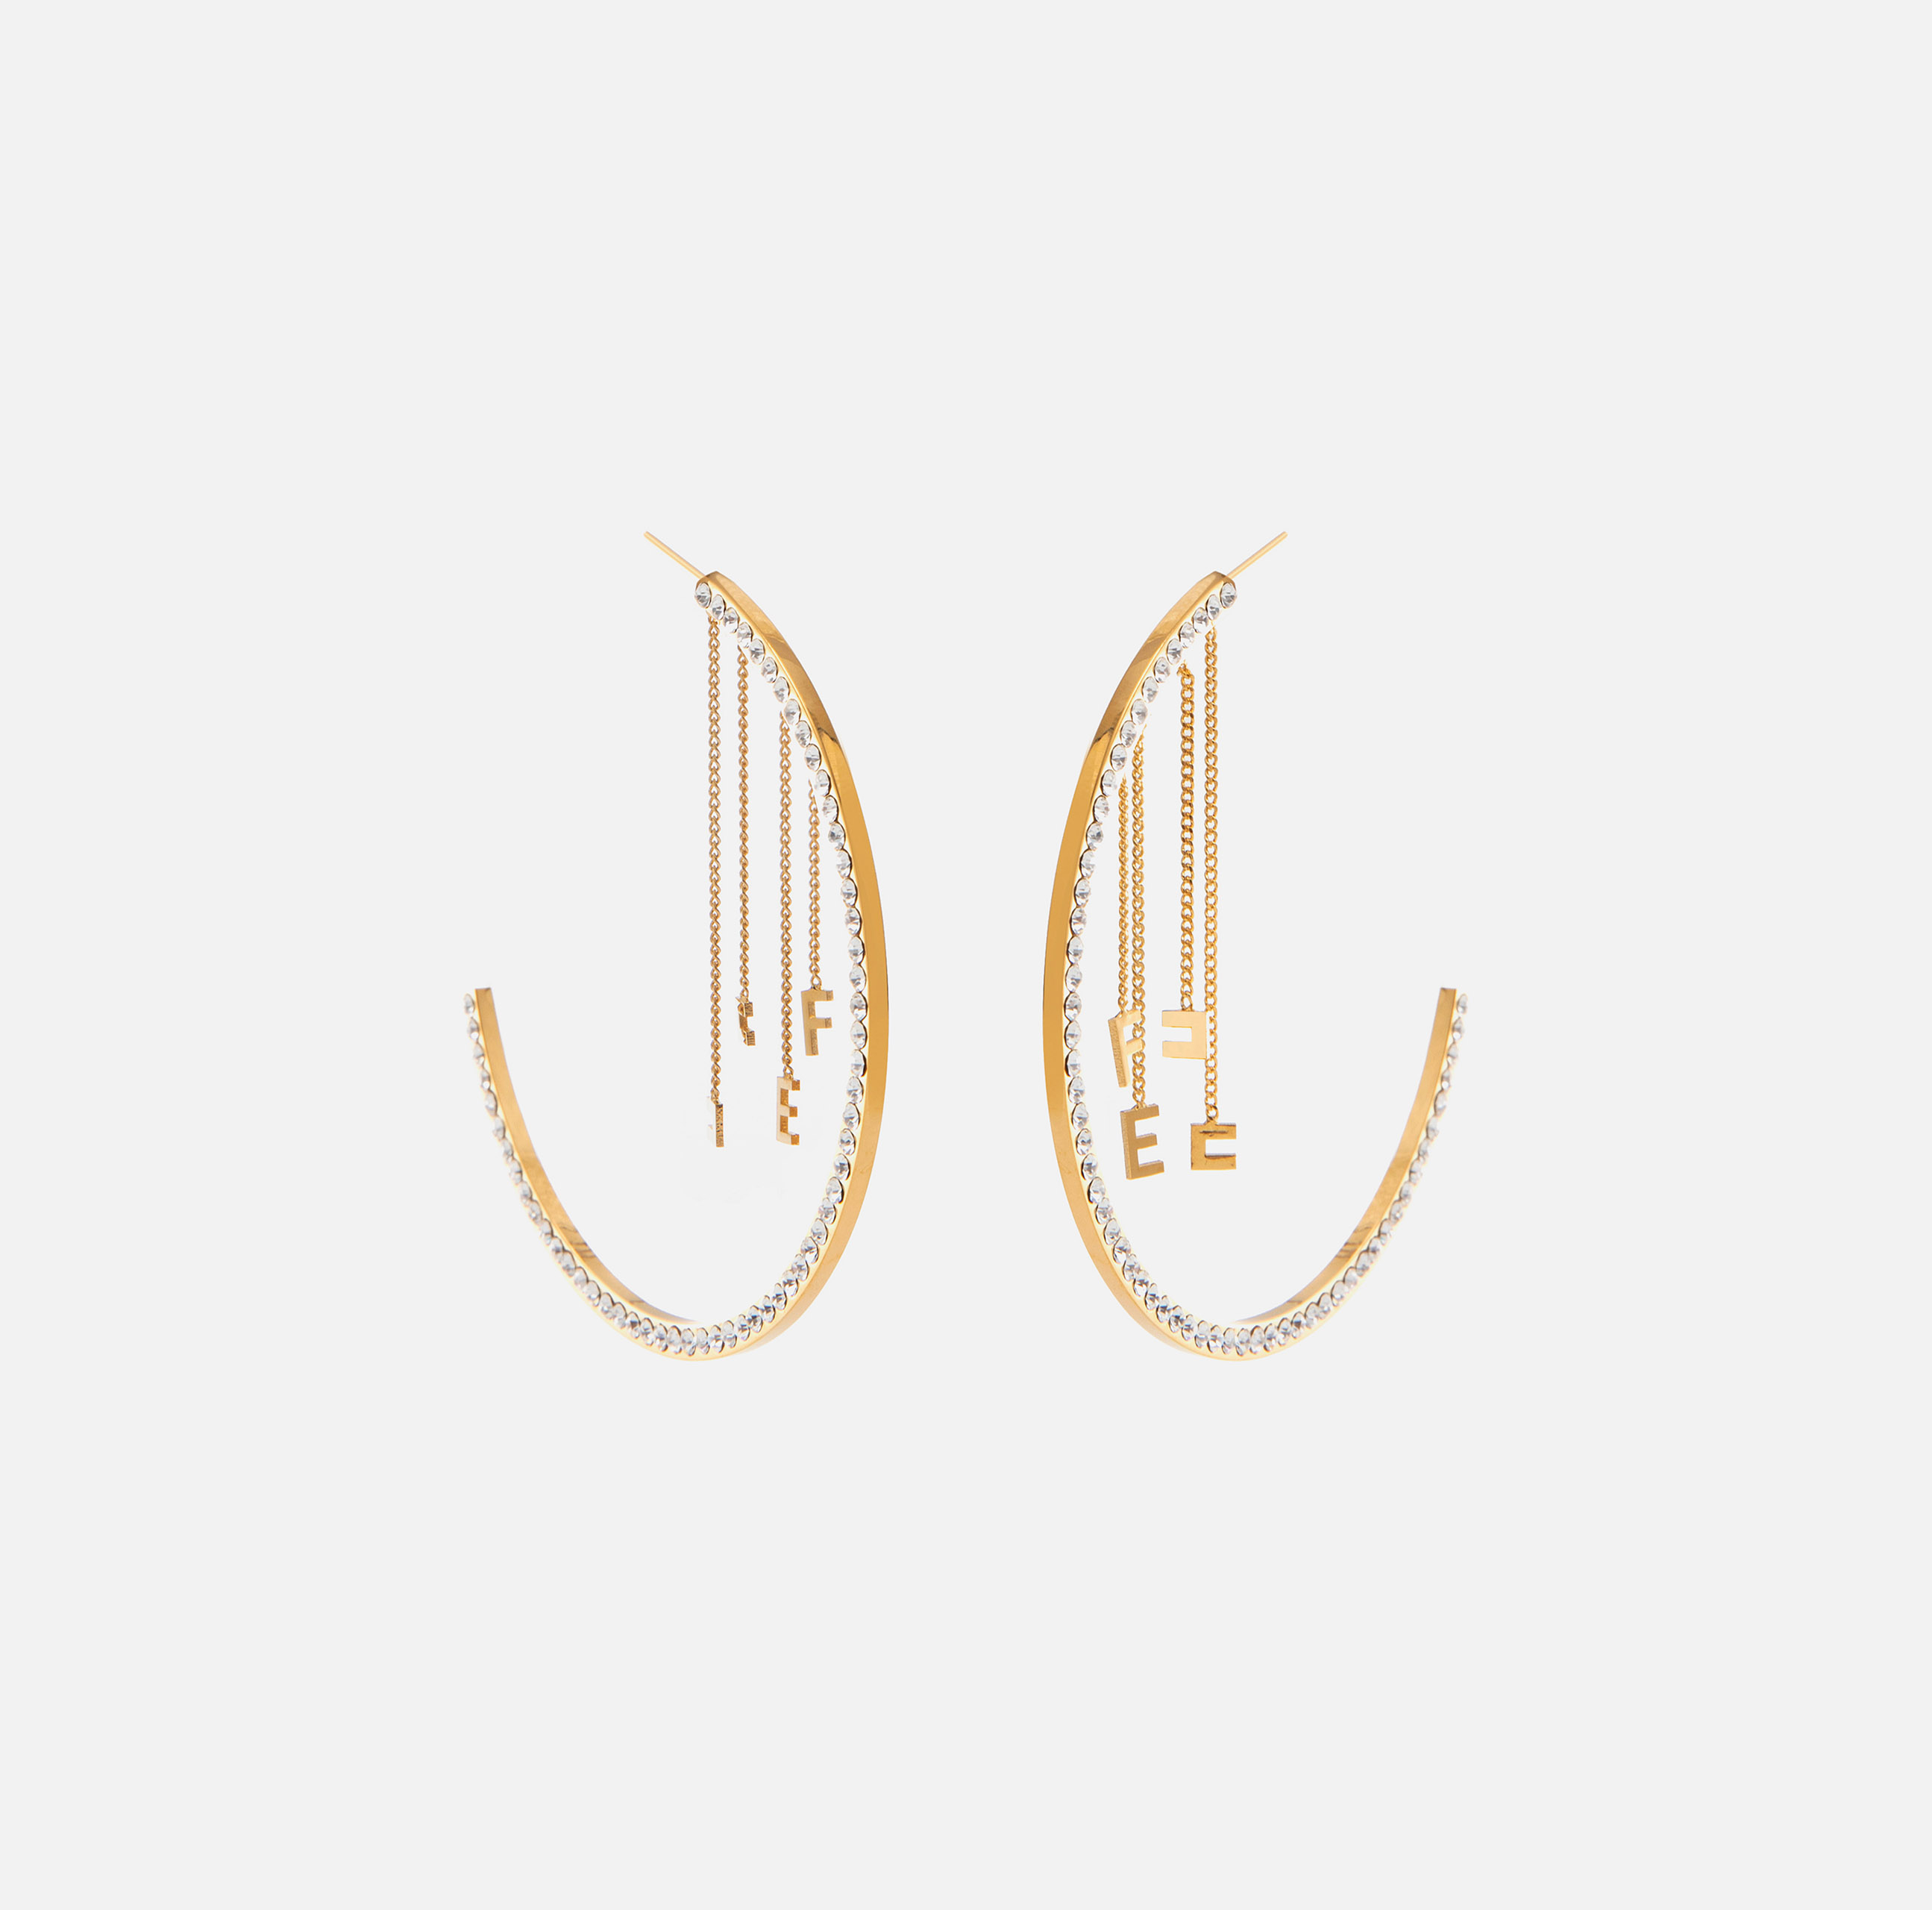 Hoop earrings with groumette and charms - Elisabetta Franchi